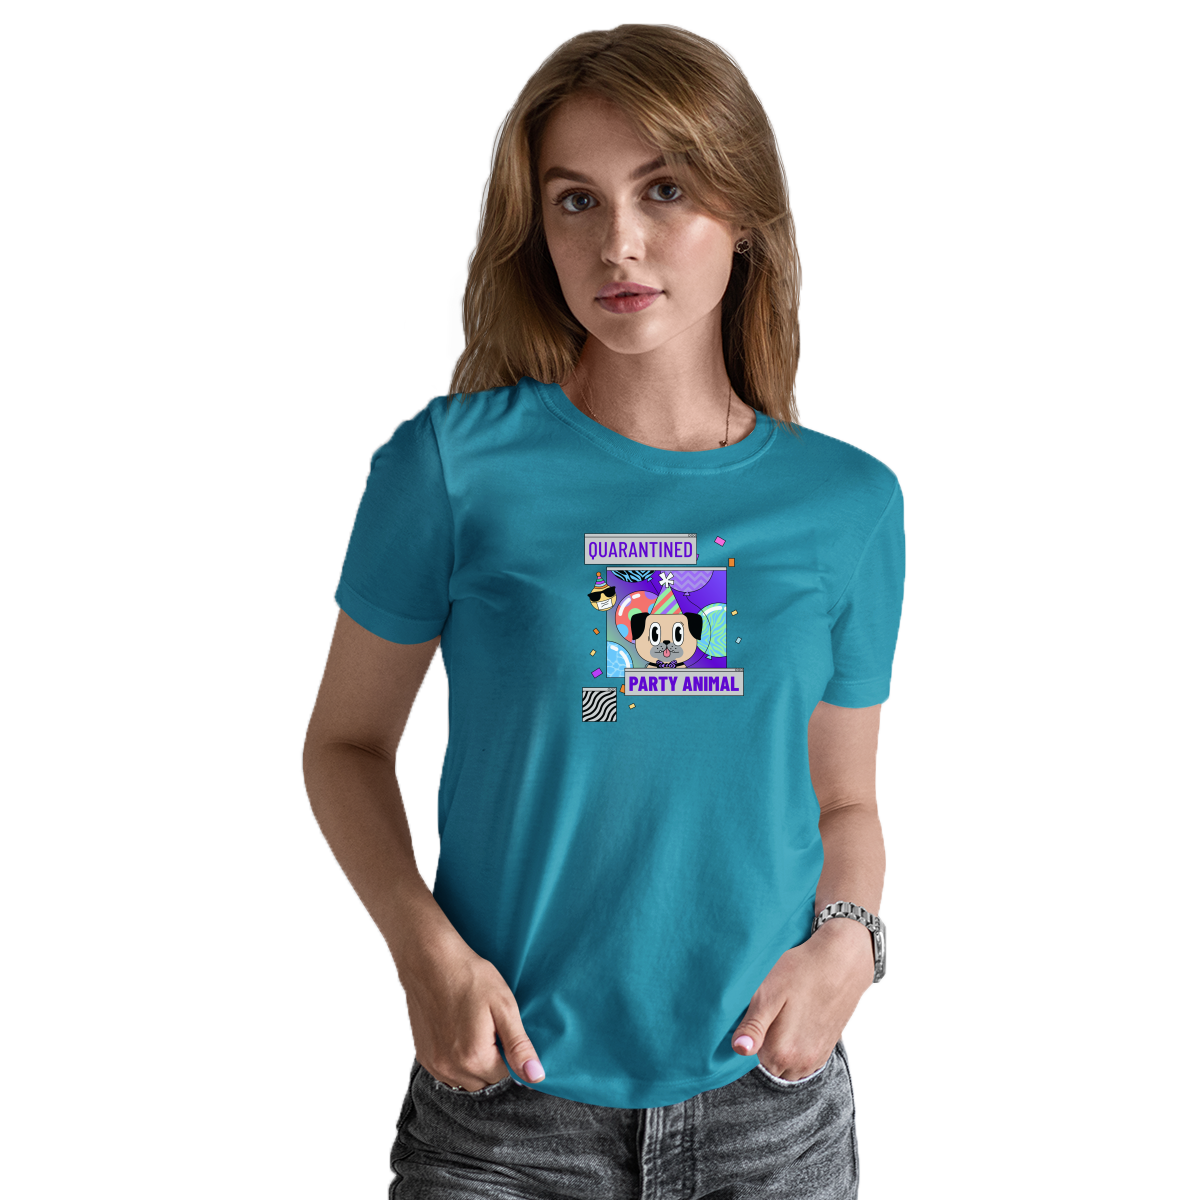 Quarantined Party Animal Women's T-shirt | Turquoise